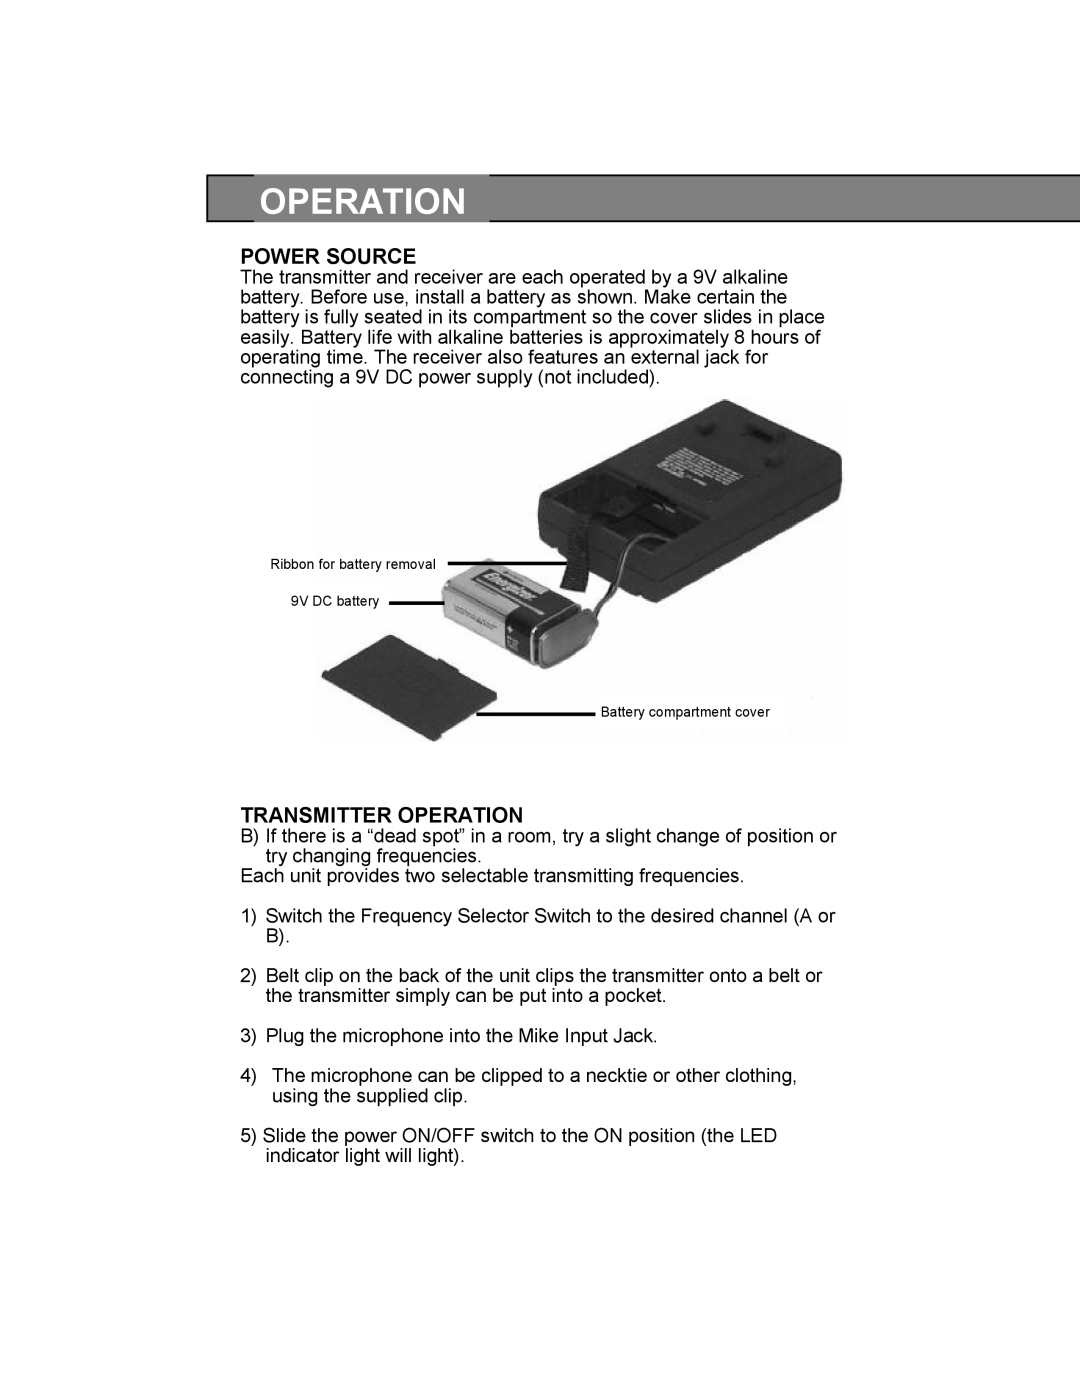 AmpliVox S1610, S1600 owner manual Power Source, Transmitter Operation 